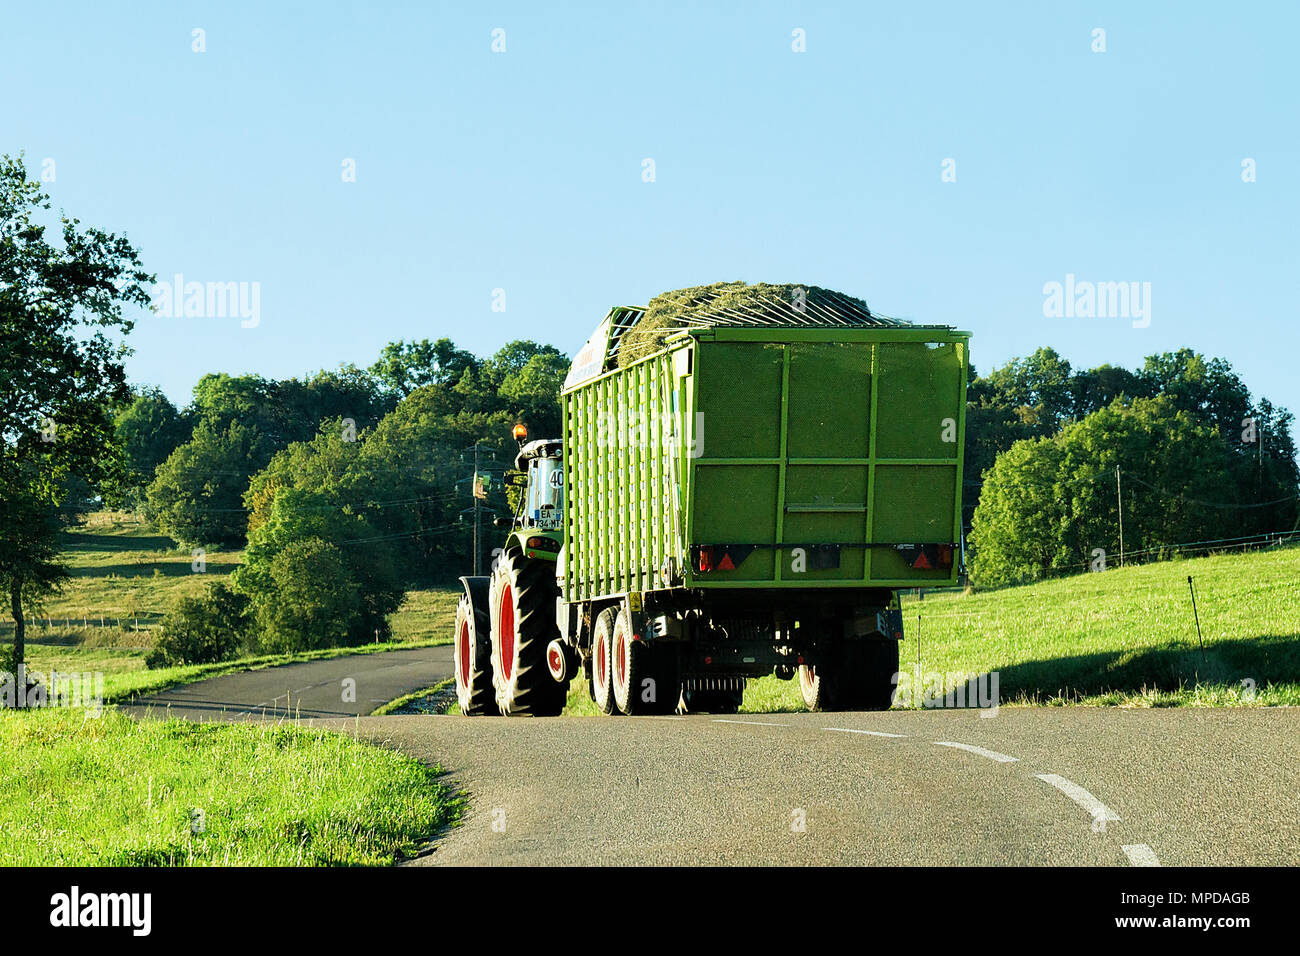 Ouhans, France - August, 25, 2016: Tractor with trailer full of hay on the road in Bourgogne-Franche-Comte region, France. Stock Photo